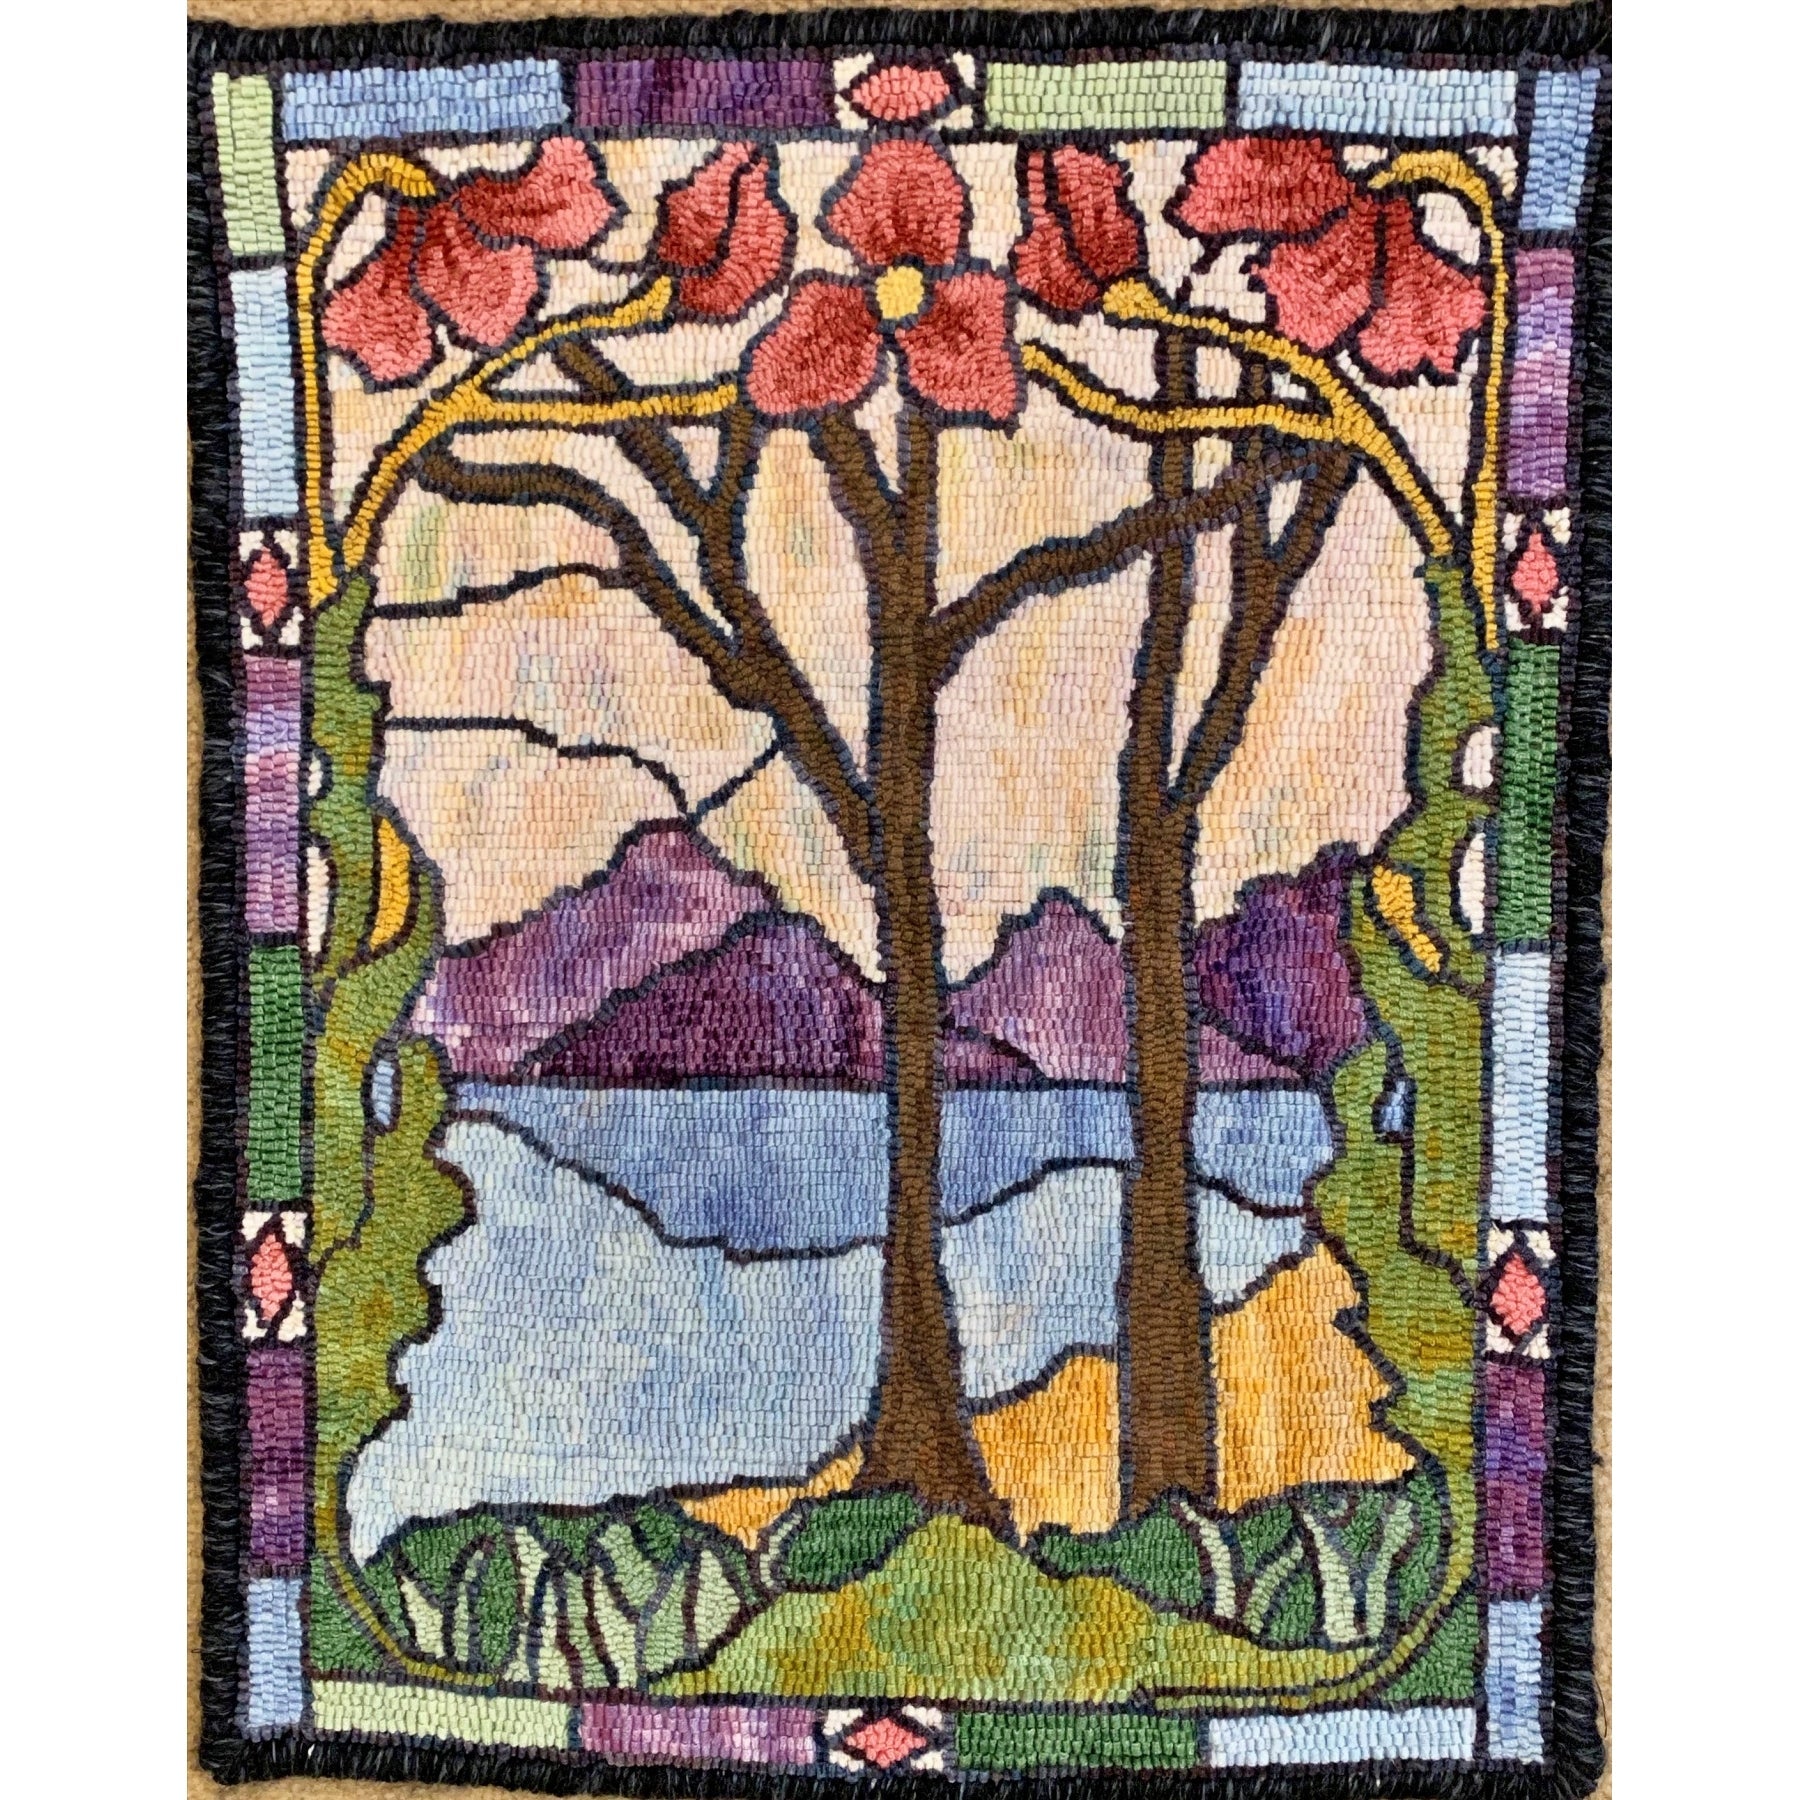 Stained Glass Landscape, rug hooked by Margaret Bedle